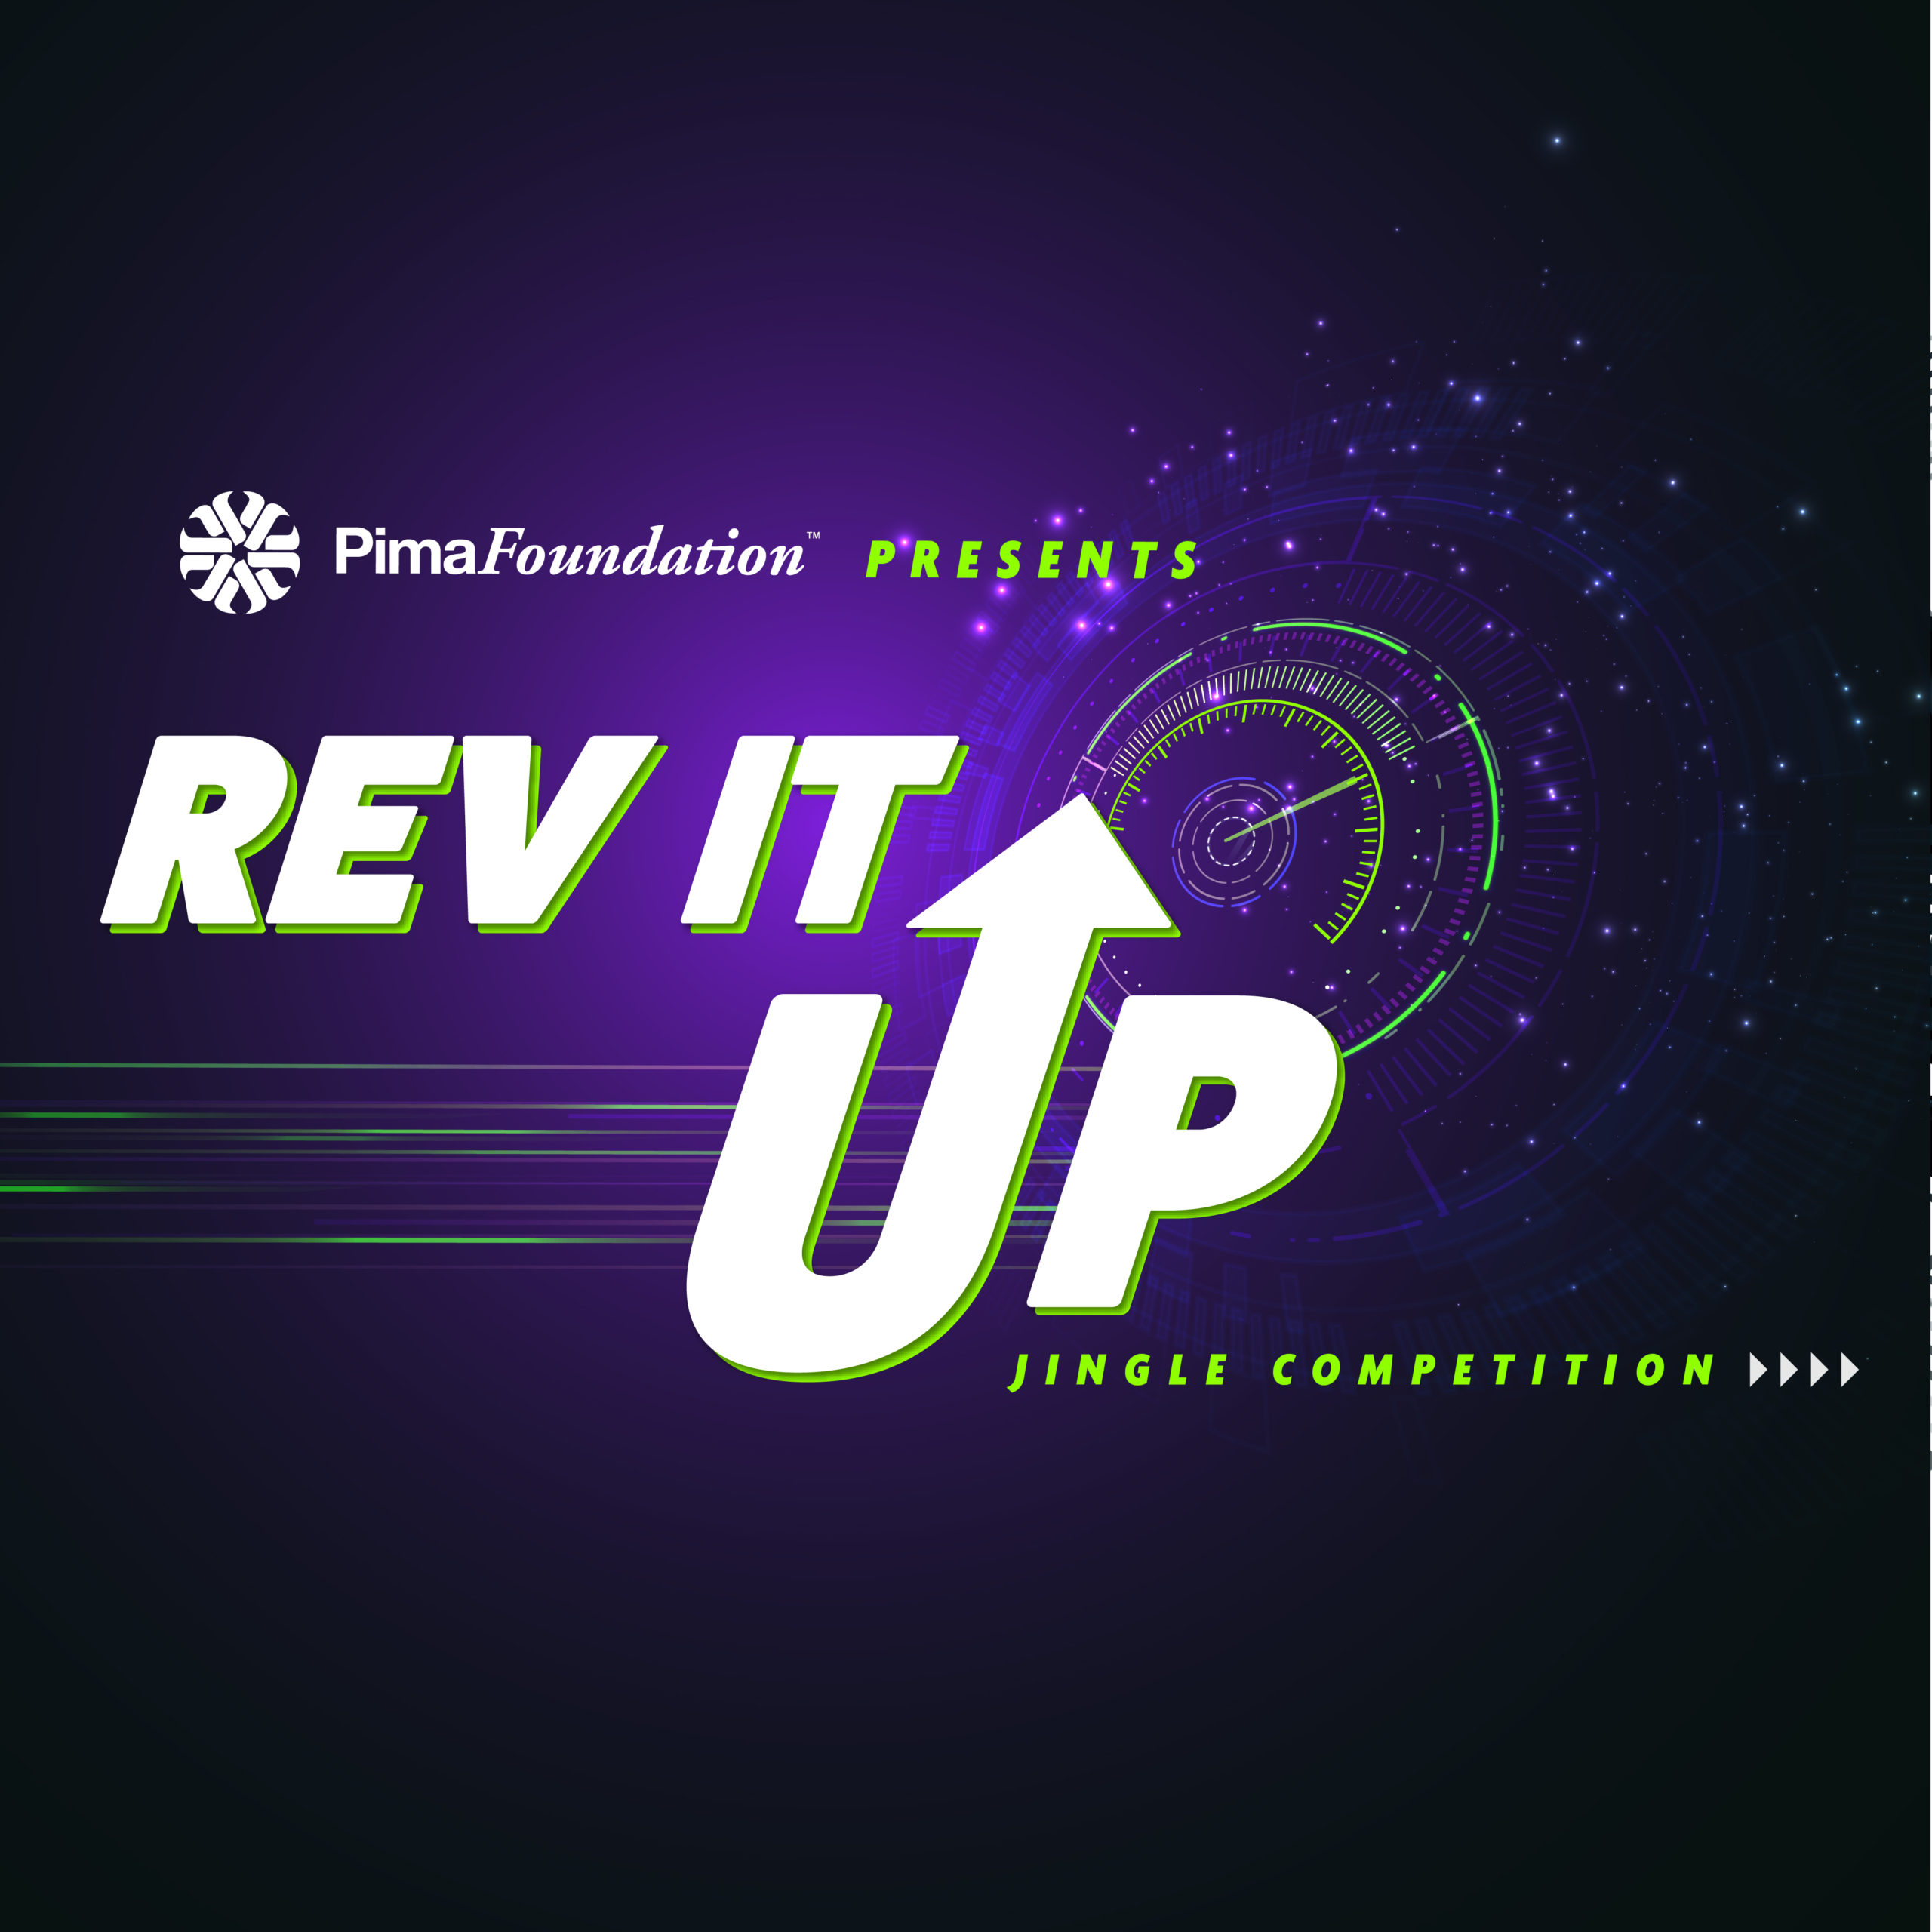 Rev It Up Event poster for the Jingle Competition